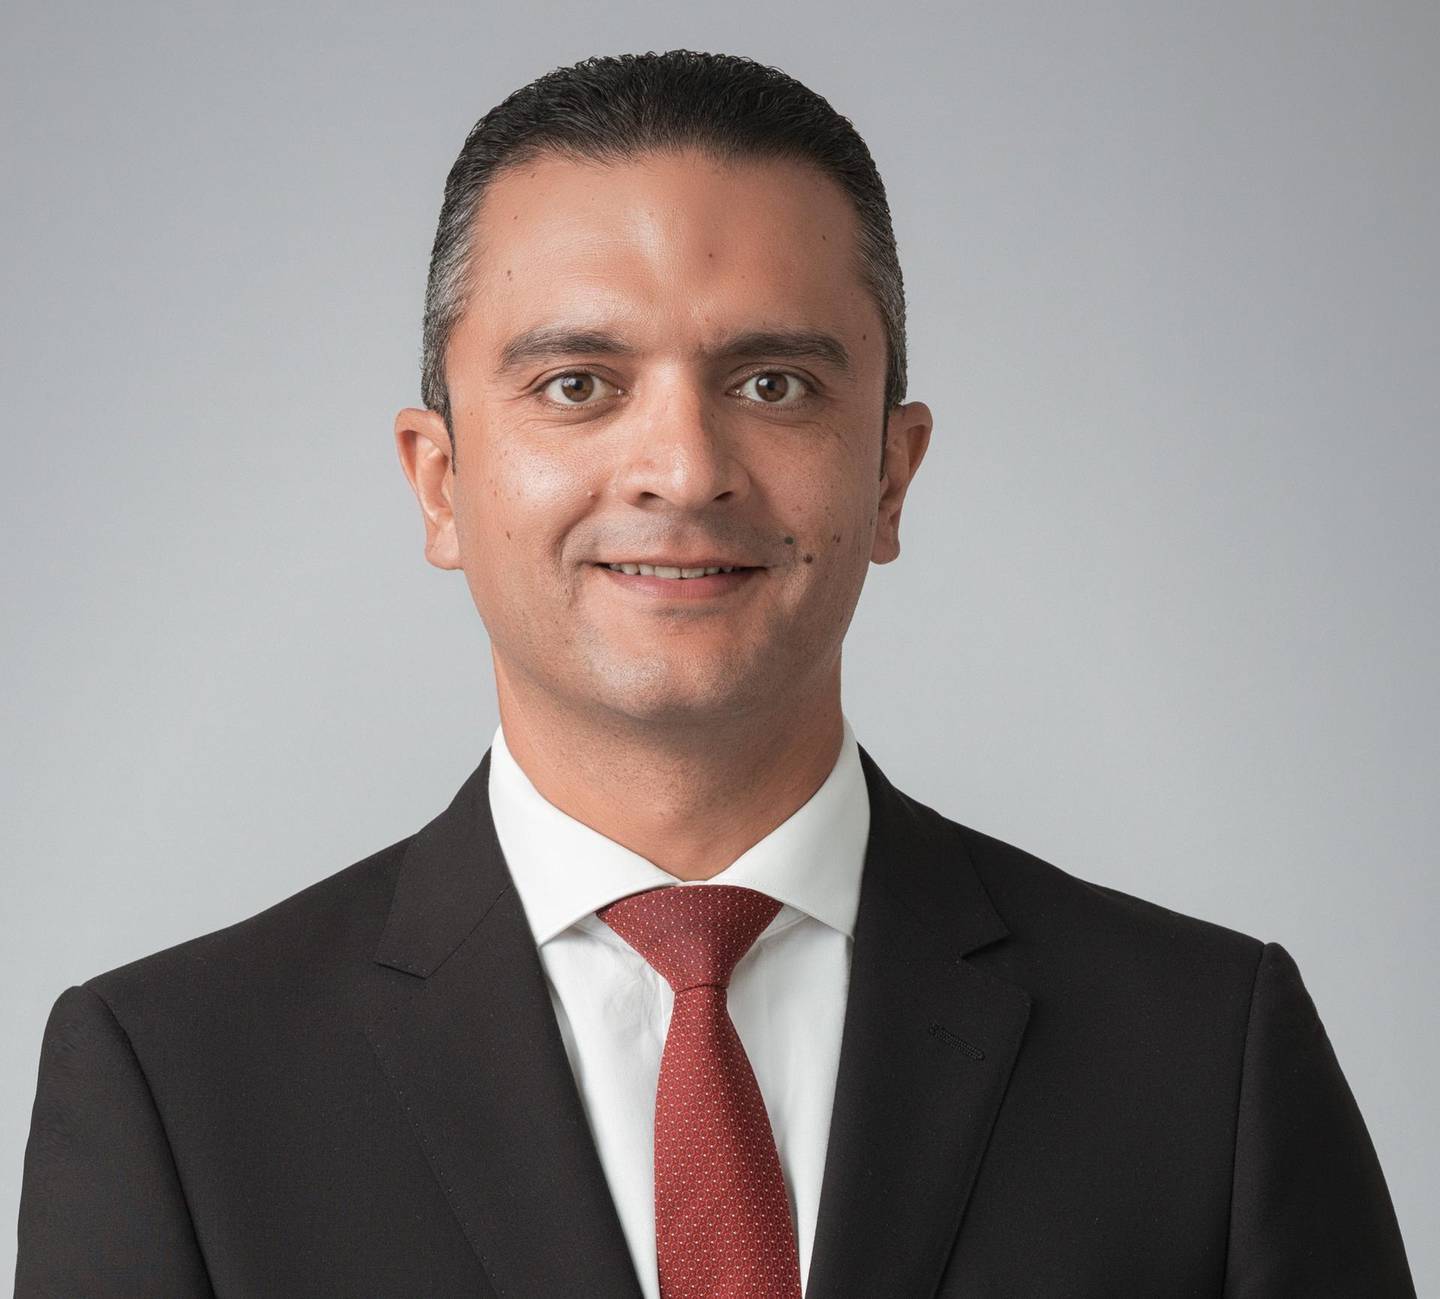 Hani Weiss, Majid Al Futtaim Retail's chief executive officer, believes many changes will linger well beyond the pandemic. Courtesy Majid Al Futtaim